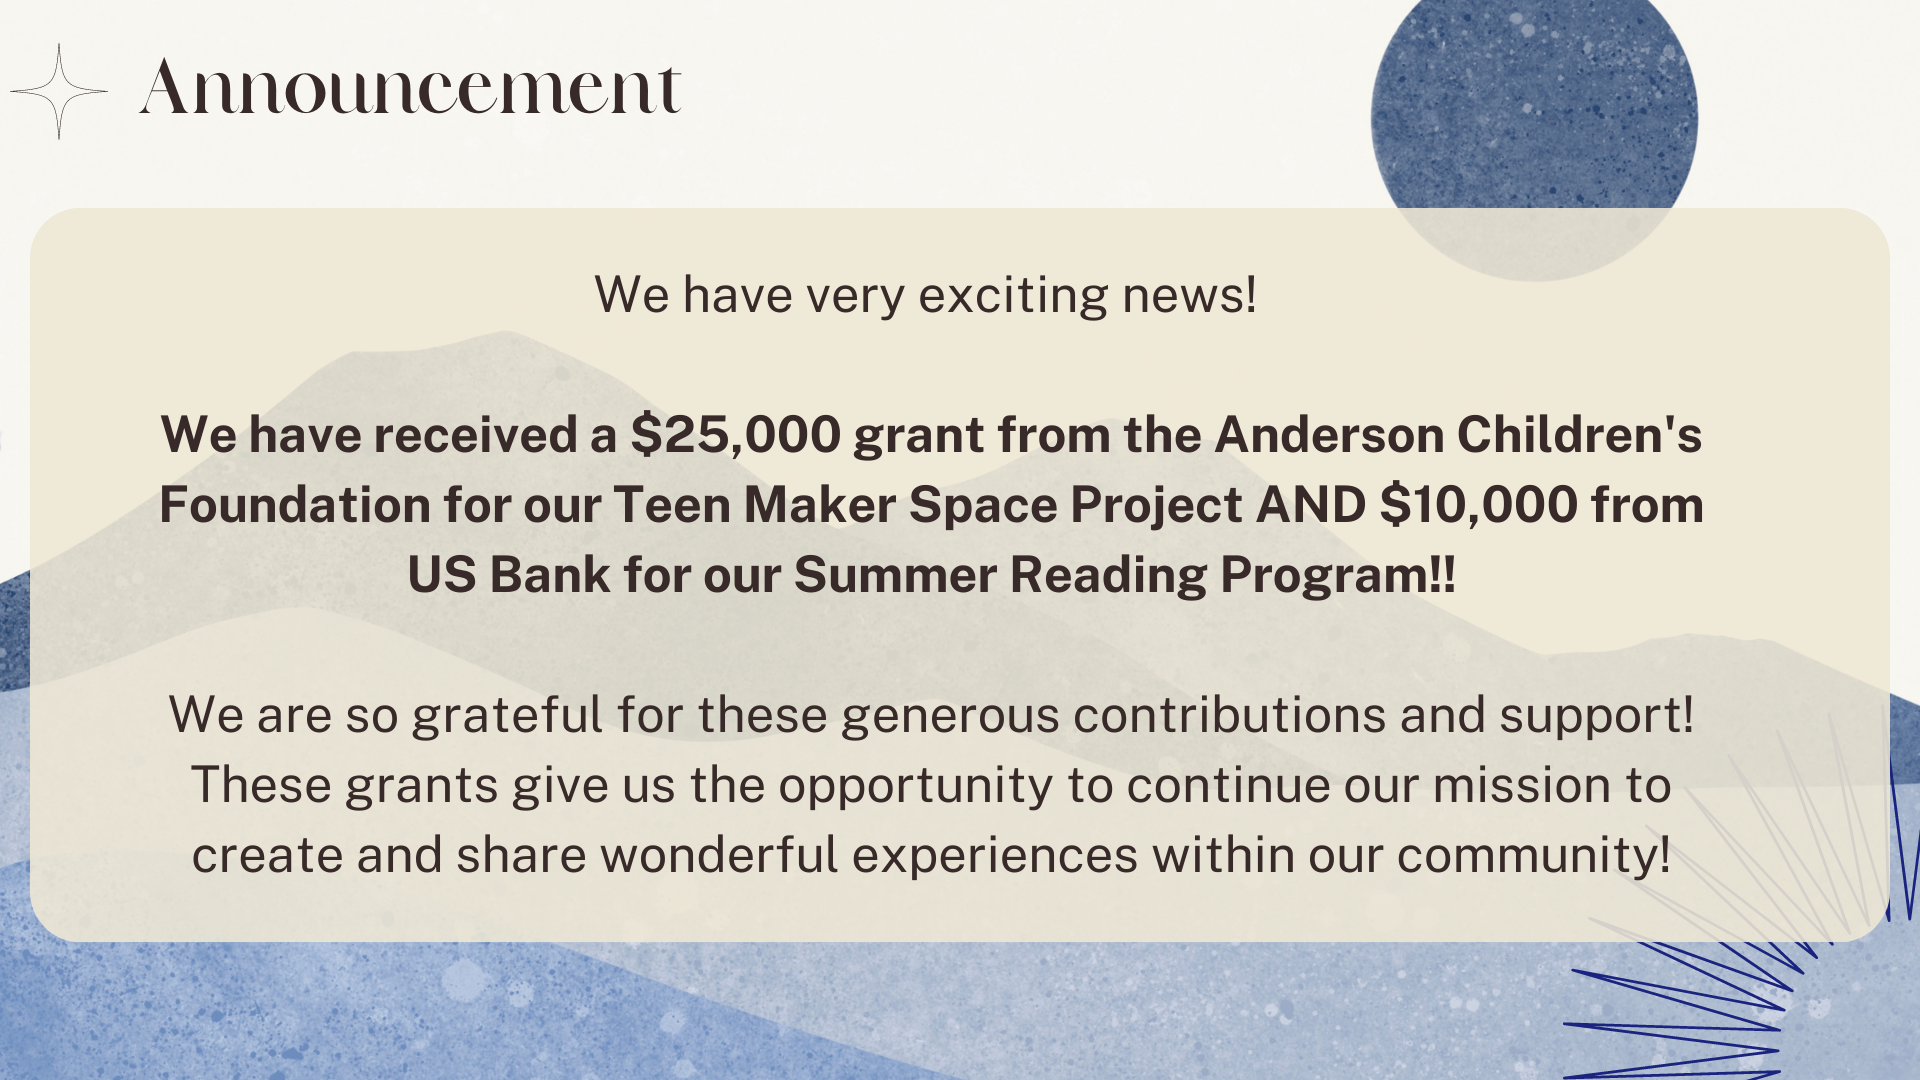 We have exciting news. We have received a $25,000 grant from the Anderson Children's Foundation for our teem maker space project and $10,000 from US bank for our summer reading program.